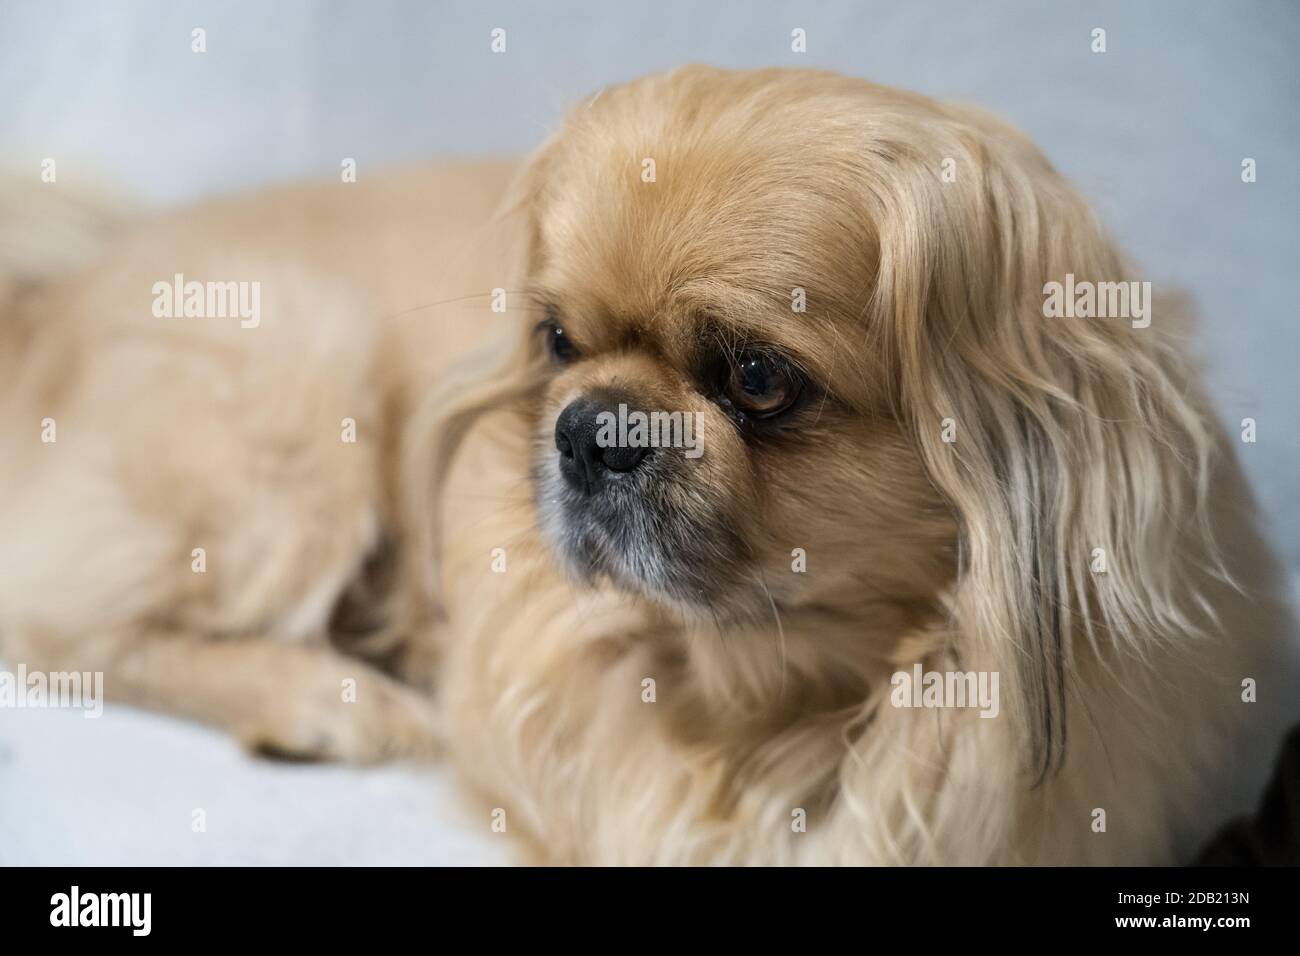 The Pekingese (also spelled Pekinese) is a breed of toy dog, originating in China. Stock Photo